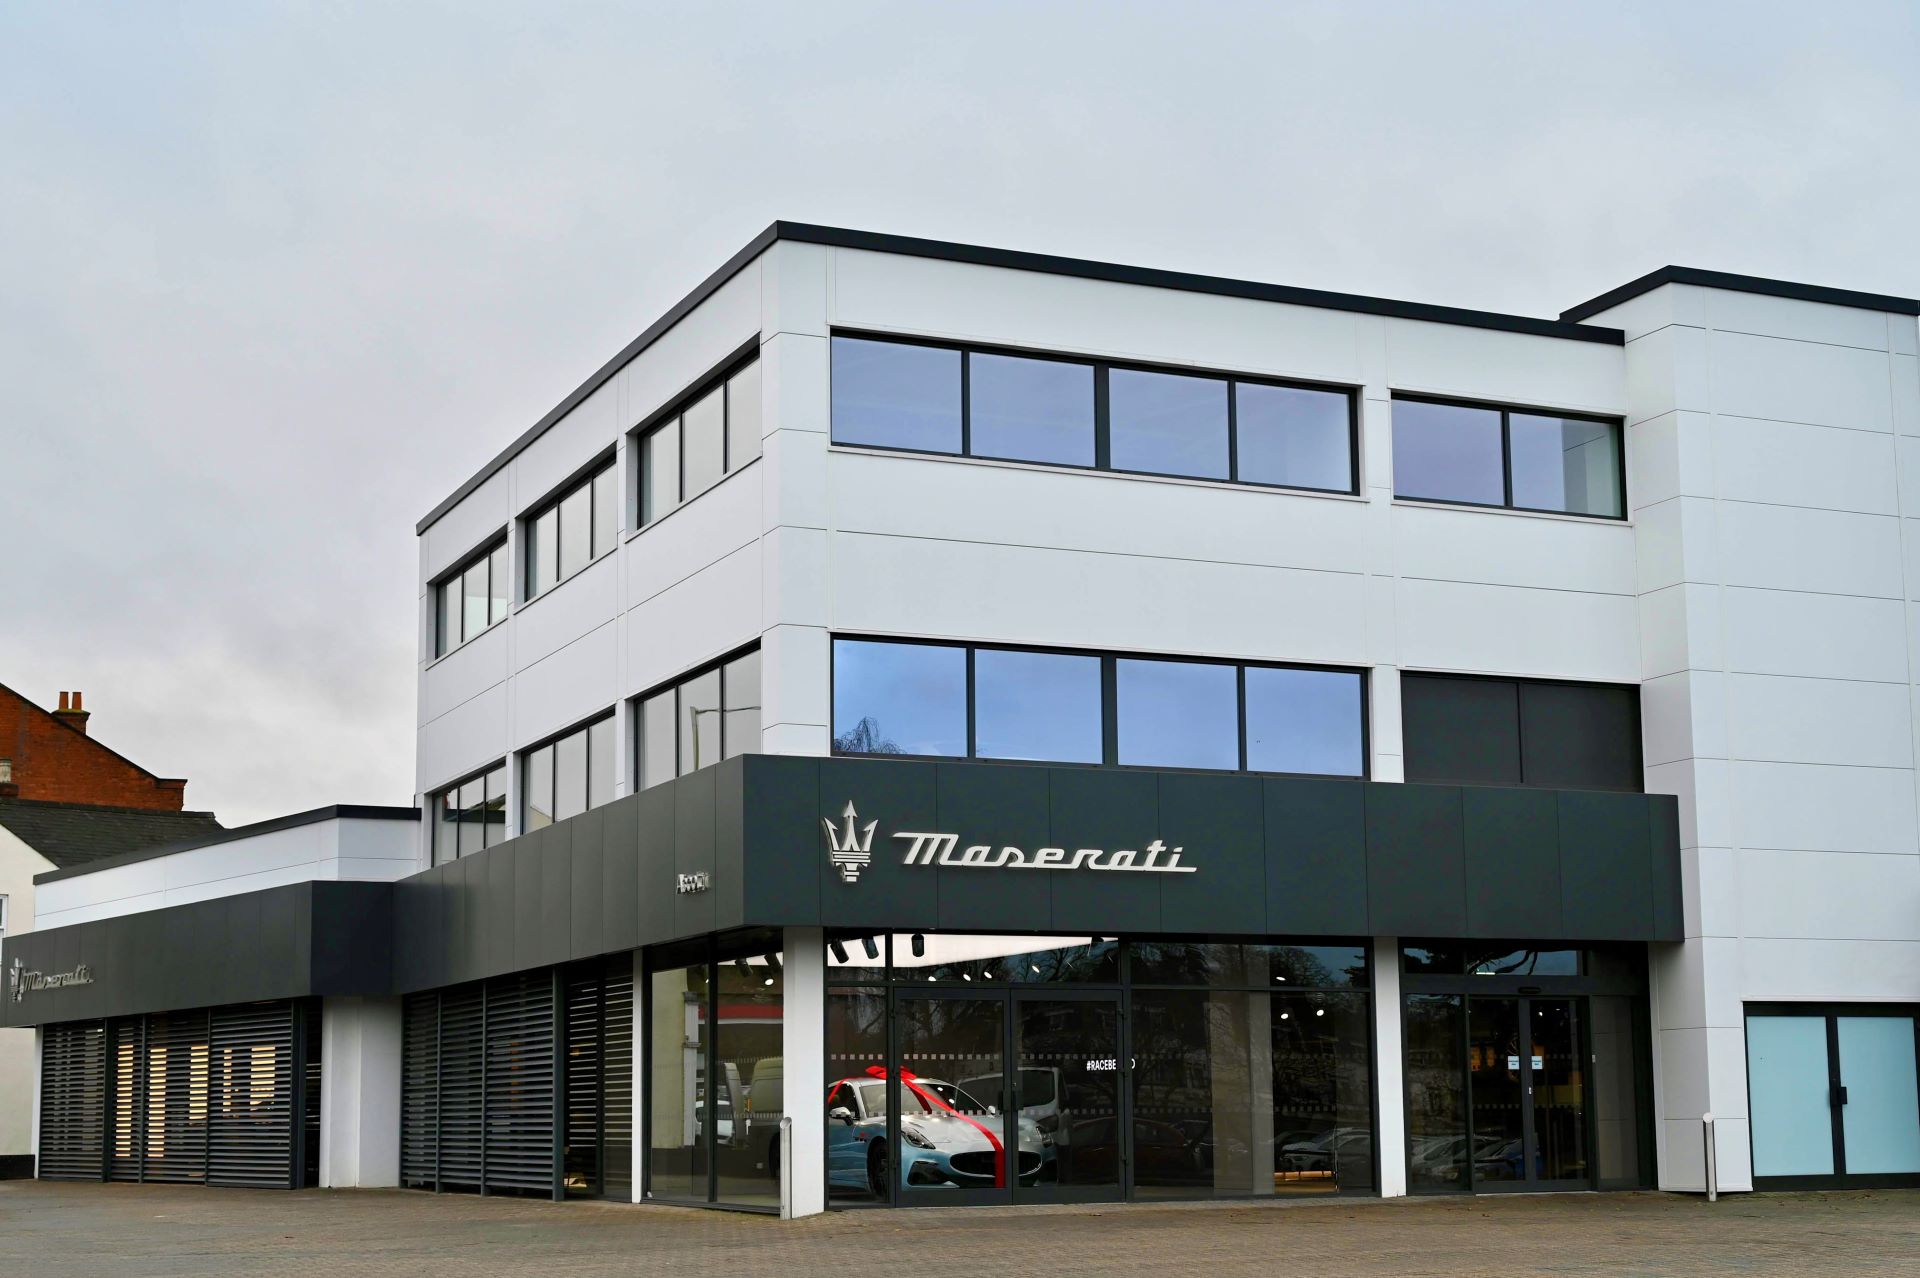 Maserati officially opens its new store in Ascot, Berkshire